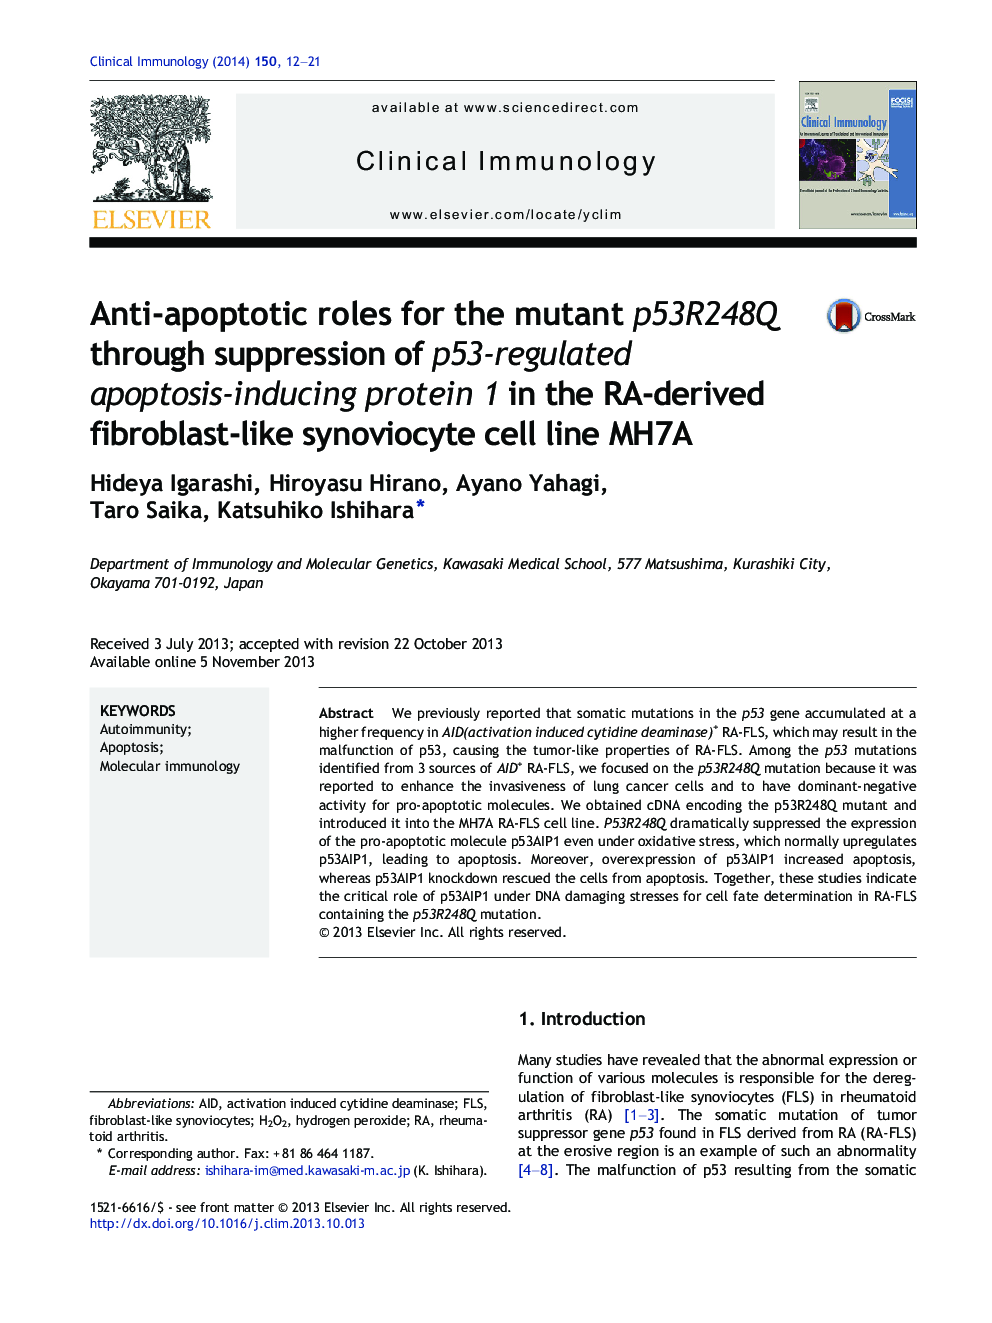 Anti-apoptotic roles for the mutant p53R248Q through suppression of p53-regulated apoptosis-inducing protein 1 in the RA-derived fibroblast-like synoviocyte cell line MH7A